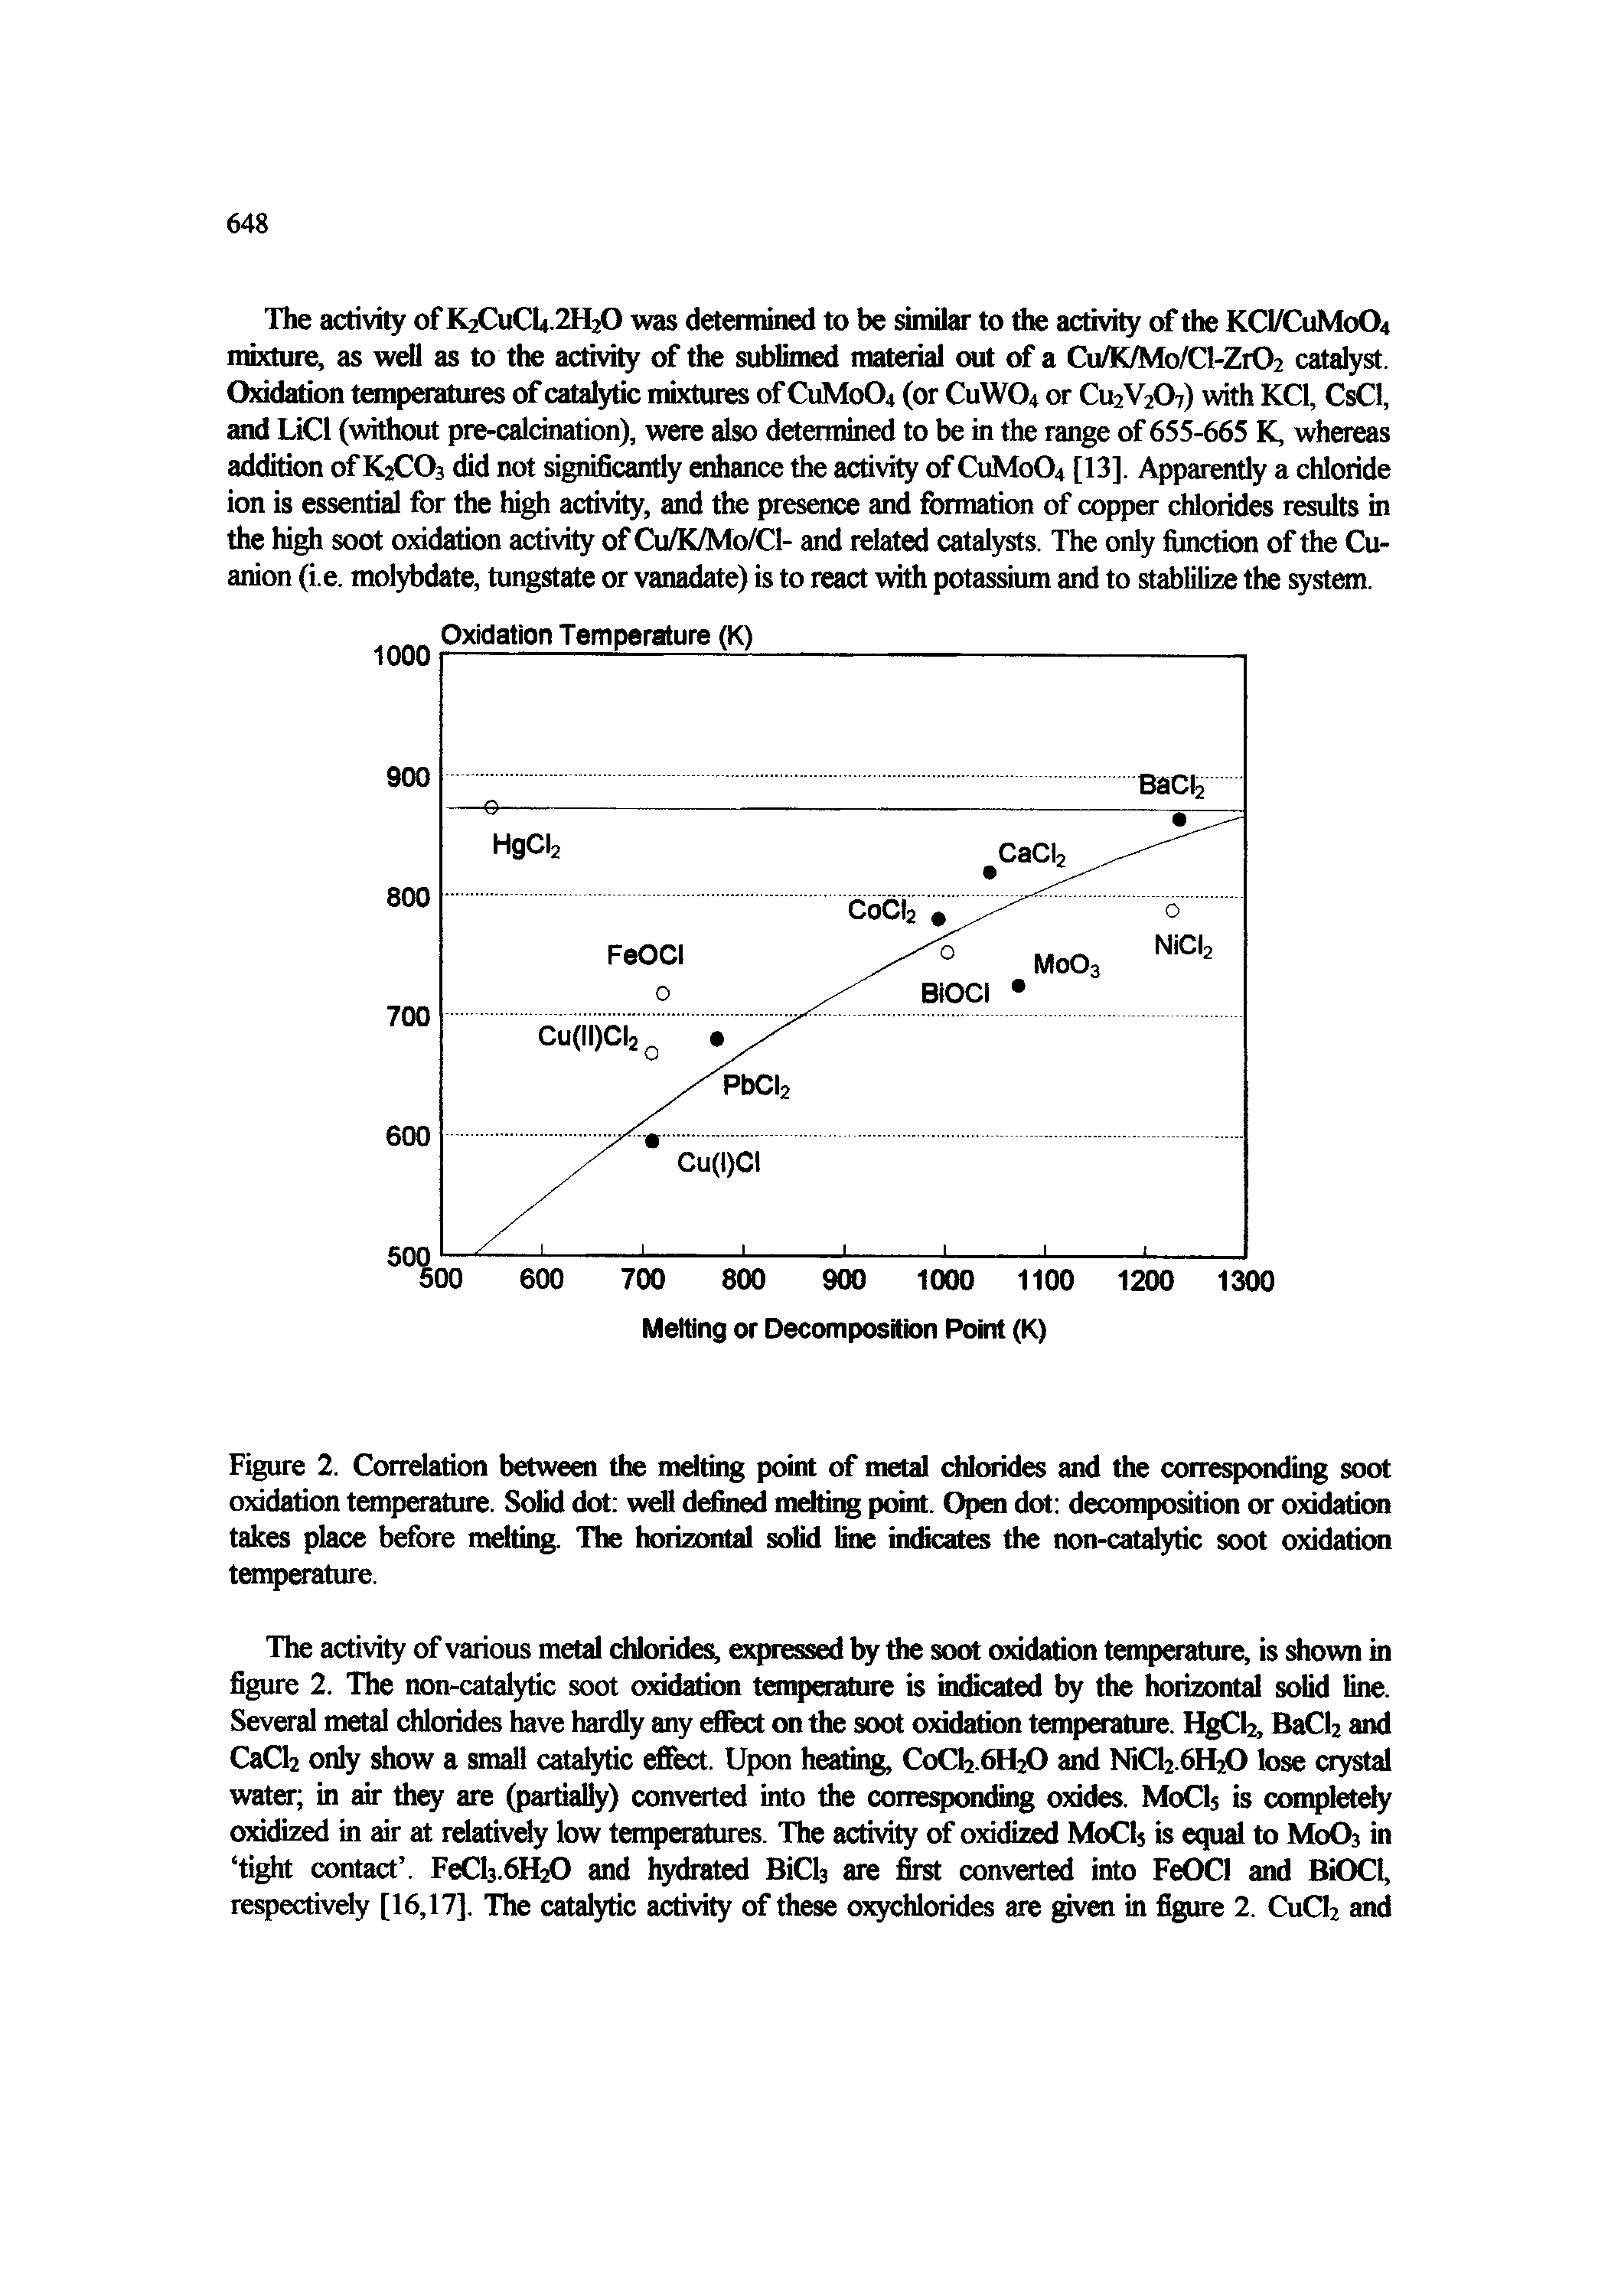 Figure 2. Correlation between the mdting point of metal ddorides and the corresponding soot oxidation temperature. Solid dot well defined melting point. Open dot deccanpoation or oxidation takes place before melting. The horizontal solid line indicates the non-catalytic soot oxidation temperature.